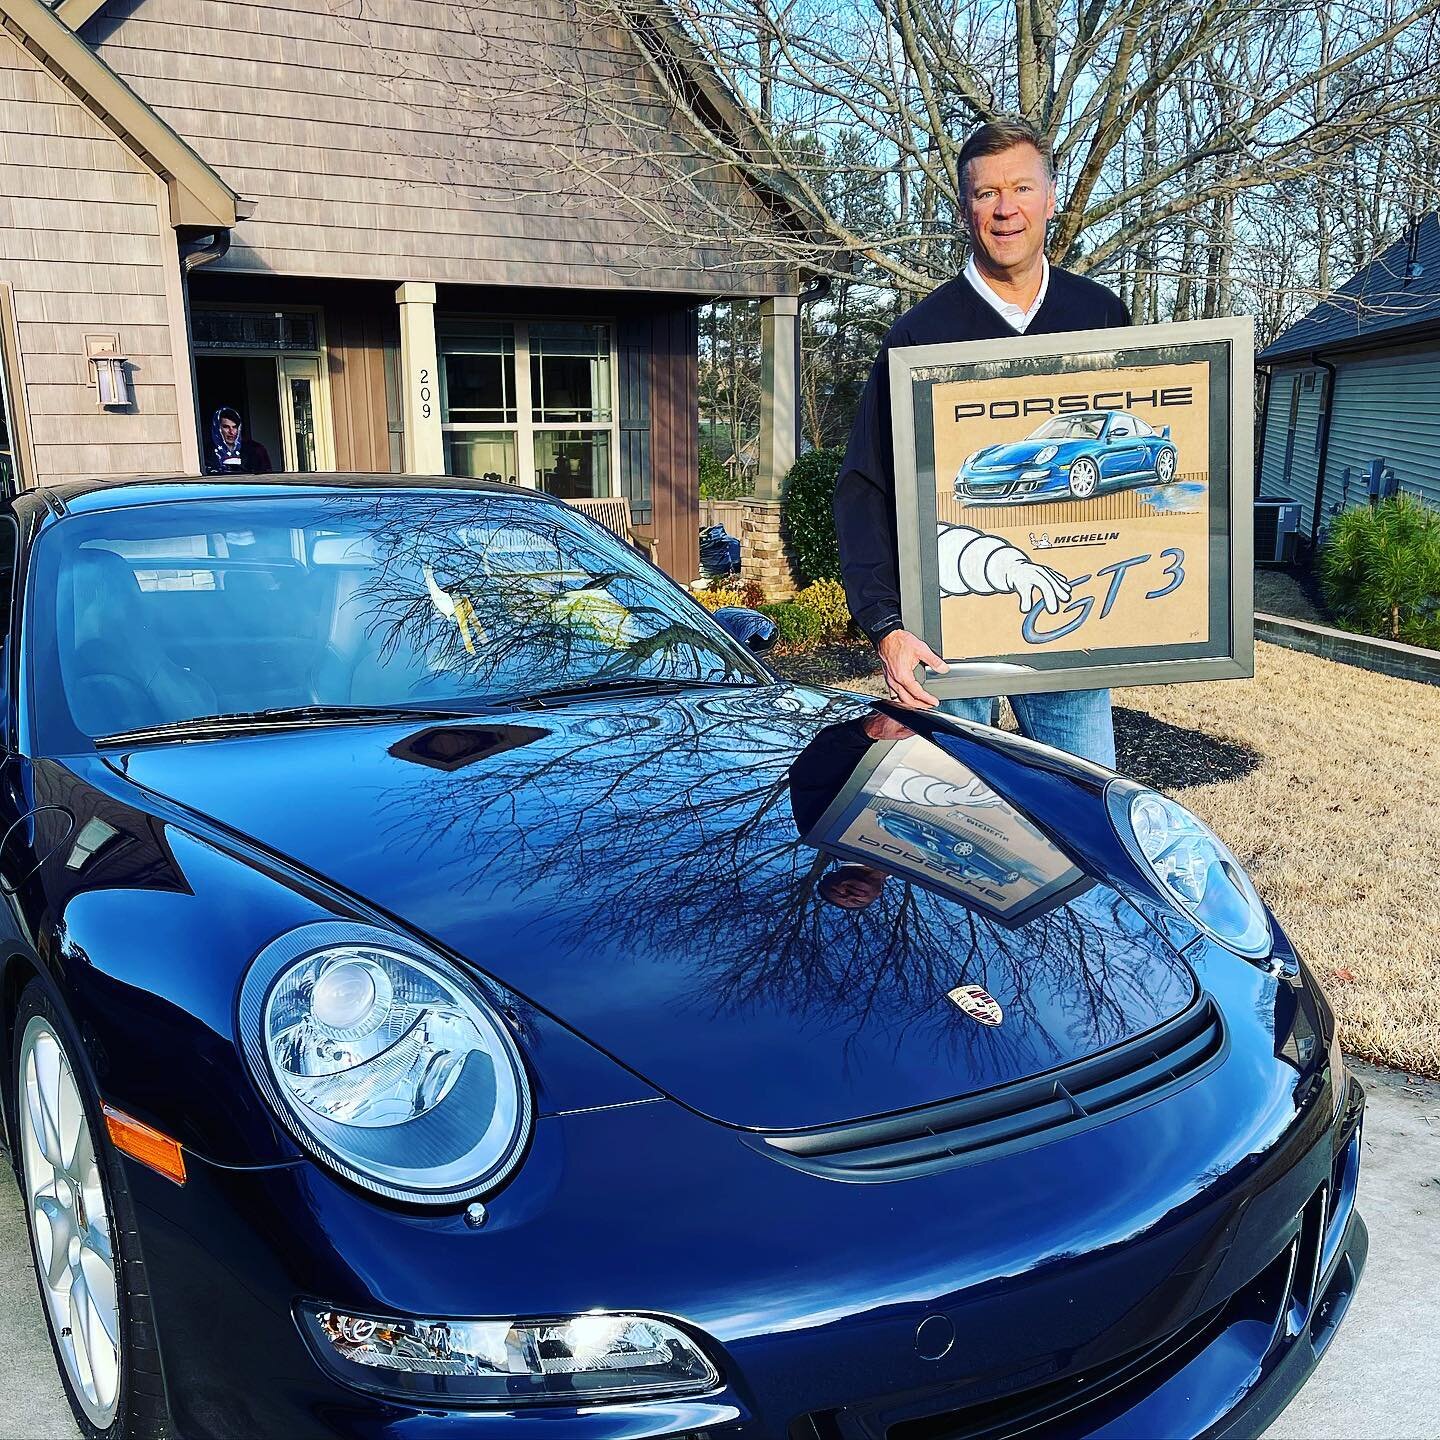 A high-end car drawn on piece of trashed cardboard, priceless. Fun to see the finished art next to the real deal! Thanks for the pic @saldenclark 

#porsche #porschegt3 #corrugatedartist #cardboardart #salvagedart